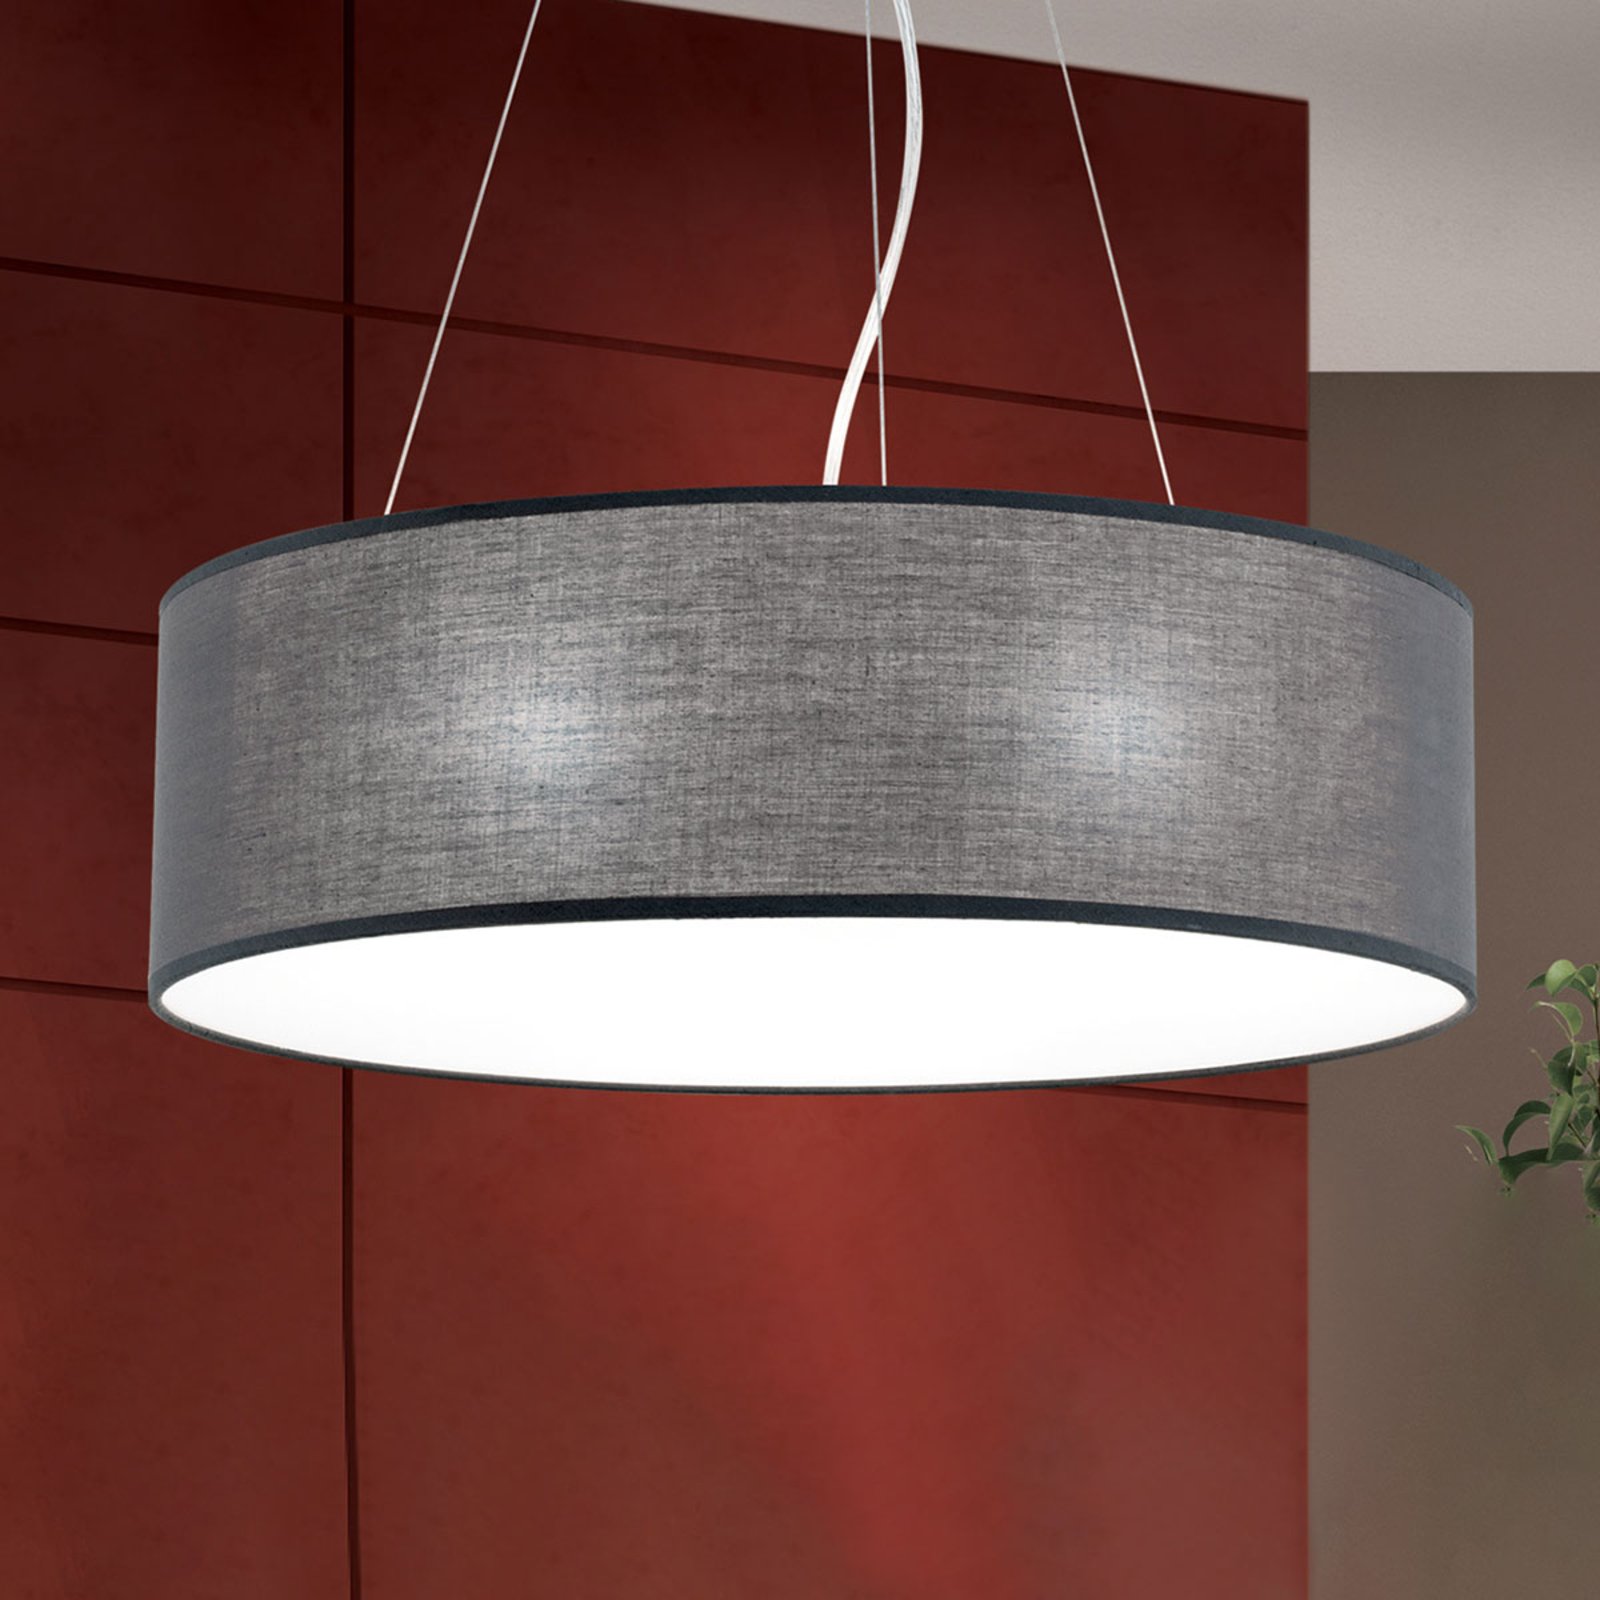 Ufo hanging light with a grey lampshade